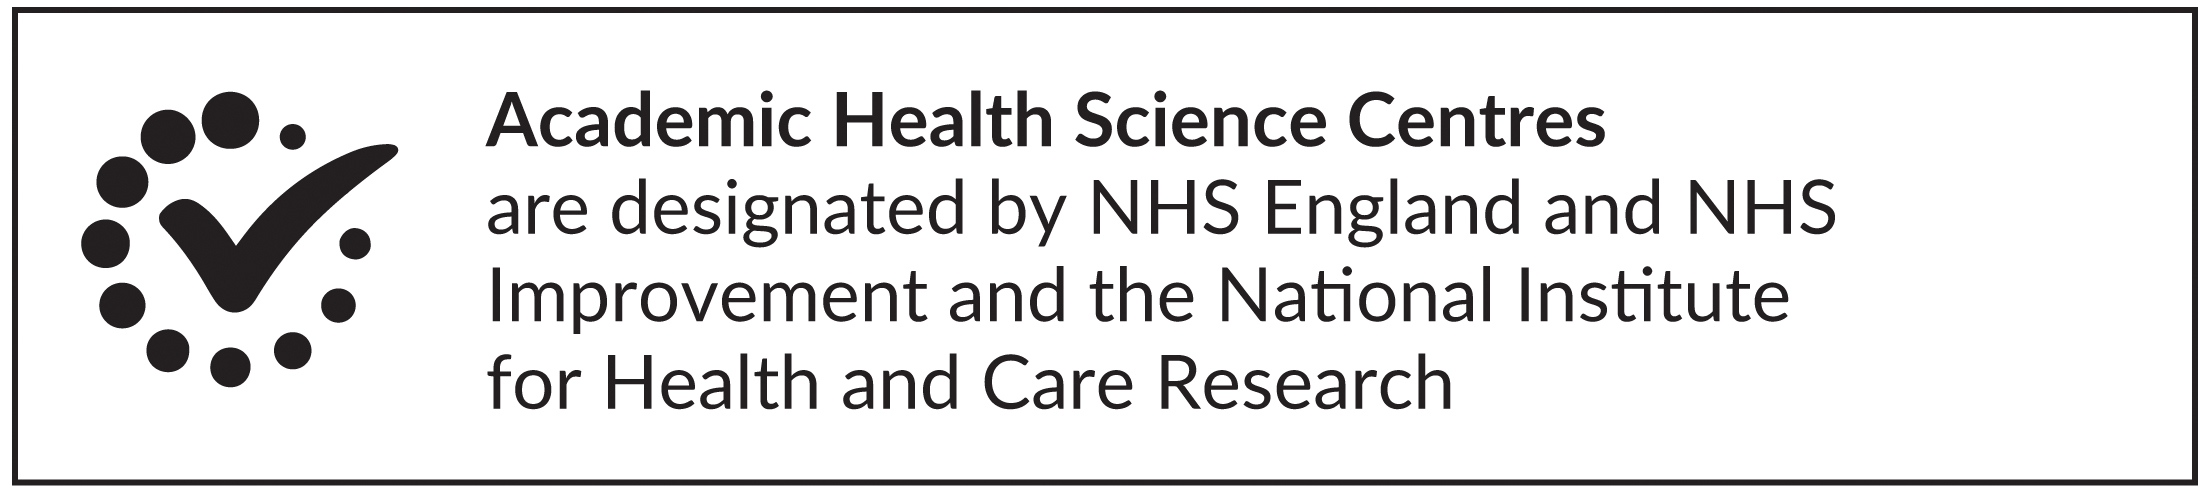 Academic Health Science Centres are designated by NHS England and NHS Improvement and the National Institute for Health and Care Research